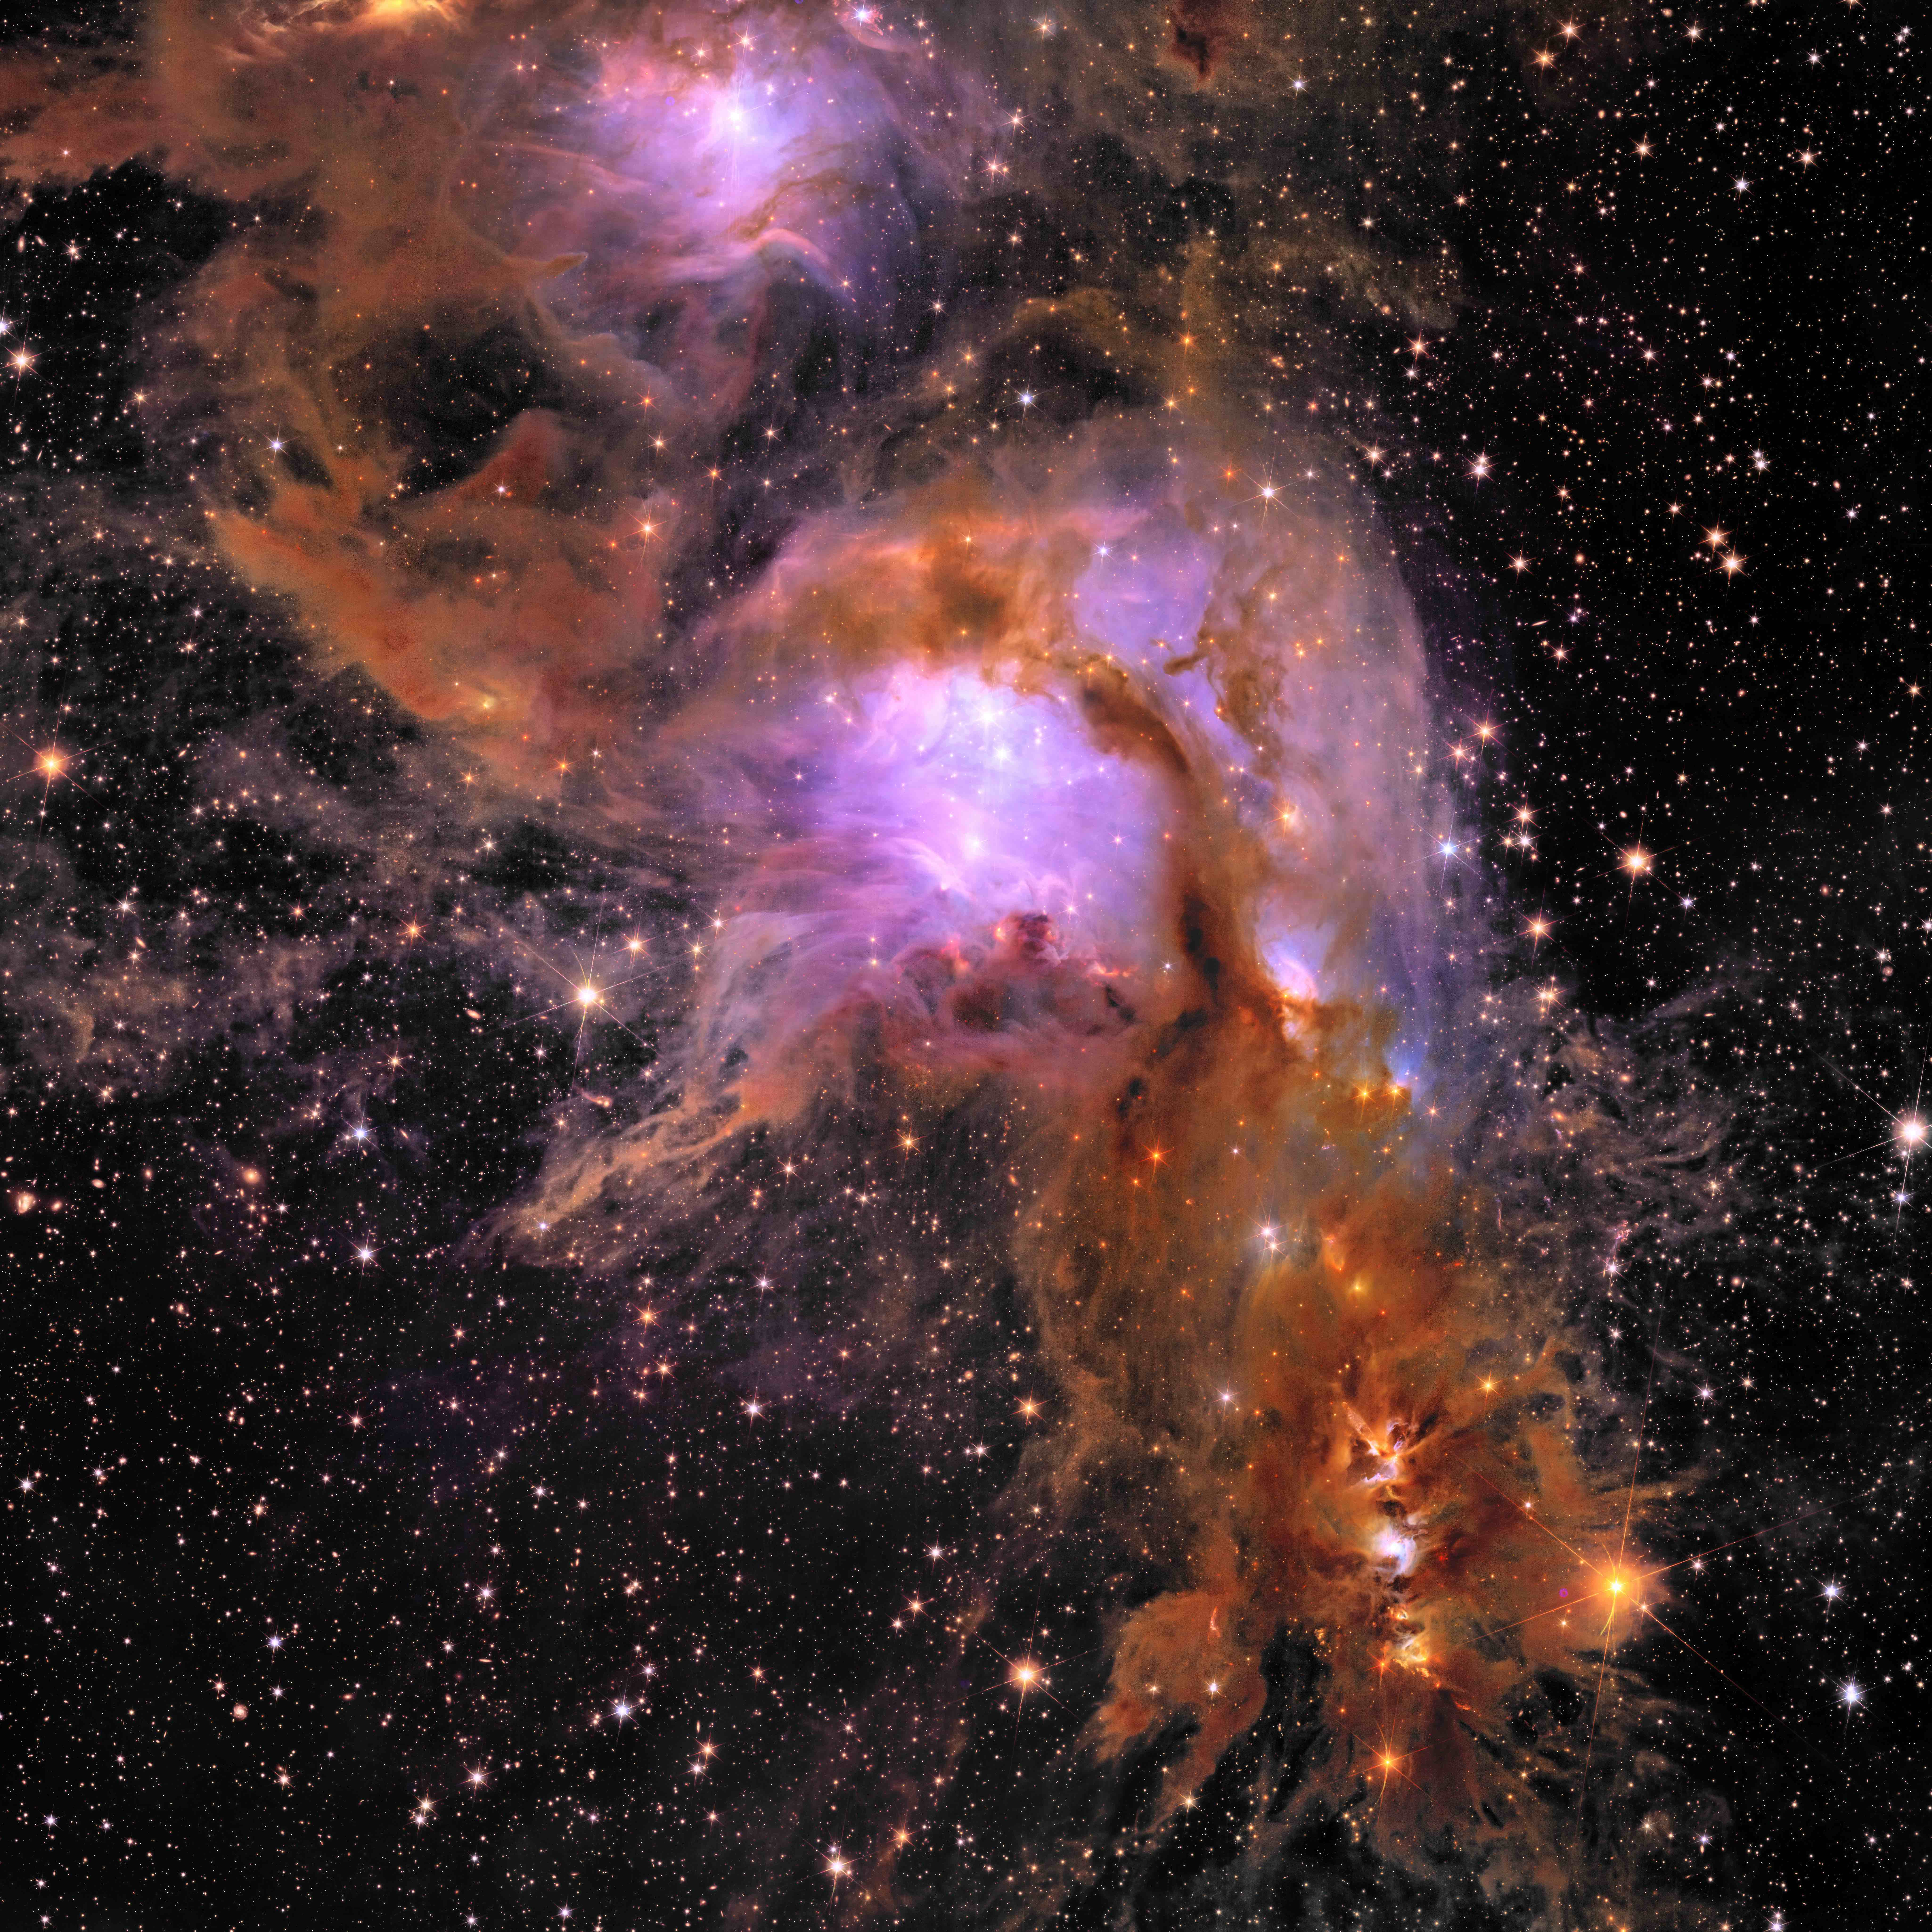 Euclid_s_new_image_of_star-forming_region_messier_78